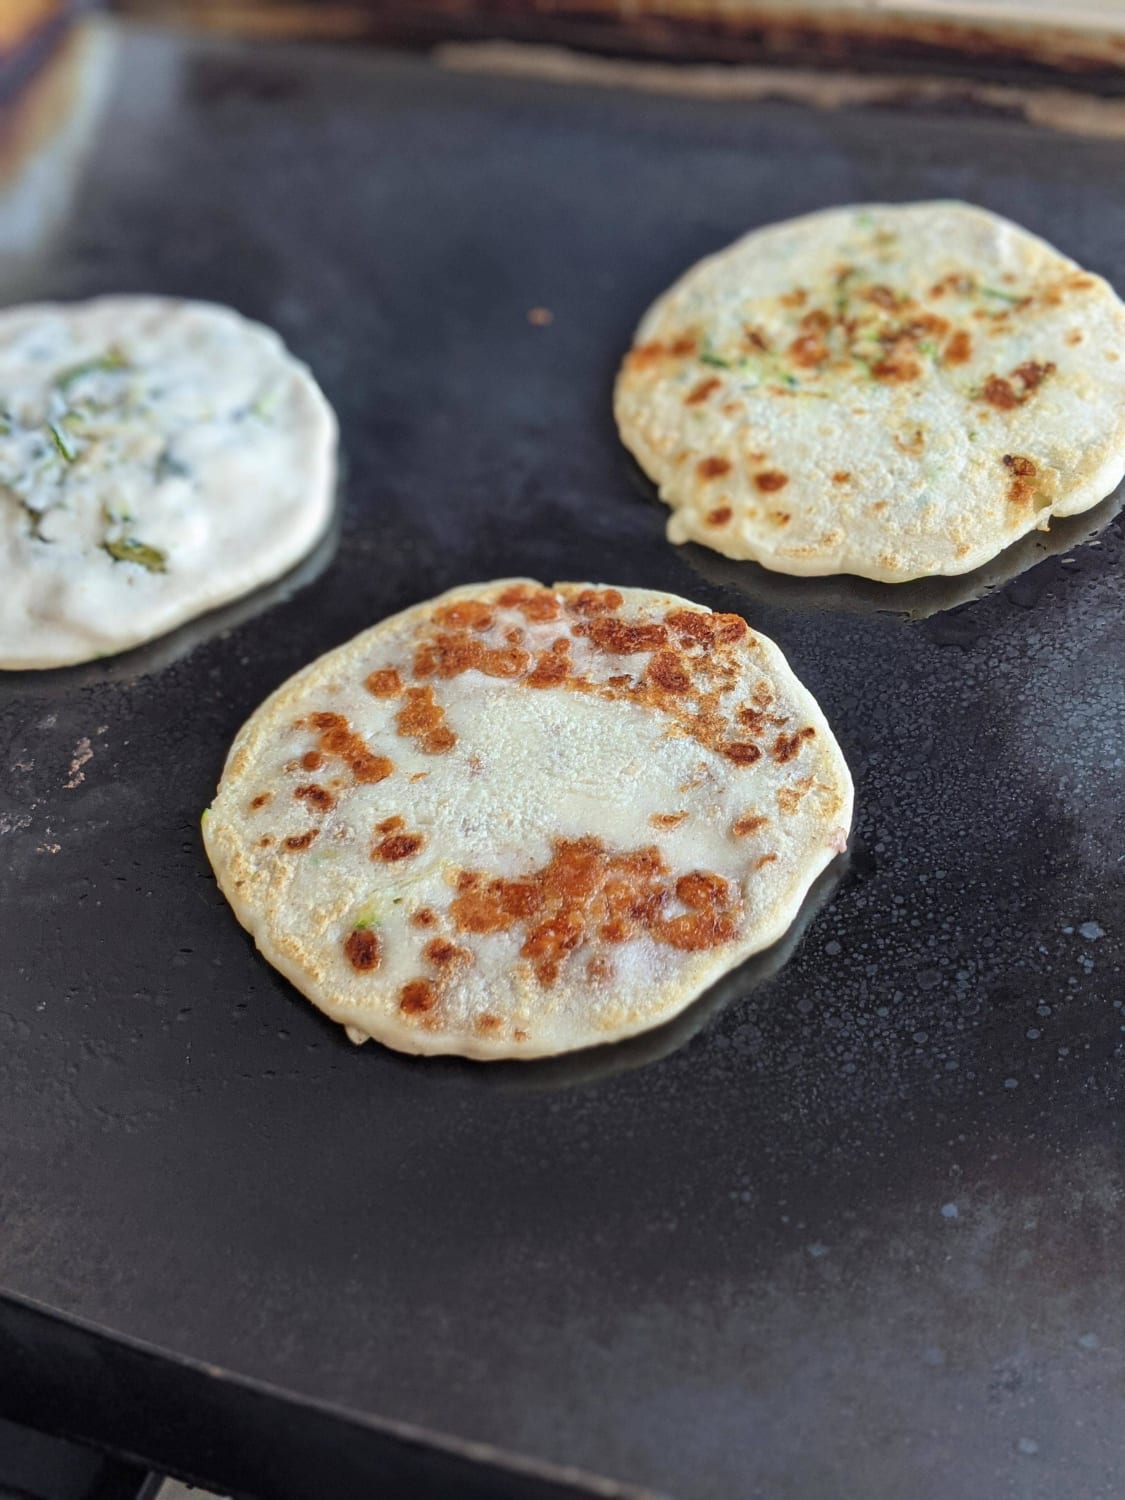 [I Ate] Pupusas! Frijole con queso y calabacínitas con queso. Beans and Cheese and Zucchini and Cheese. LA street food